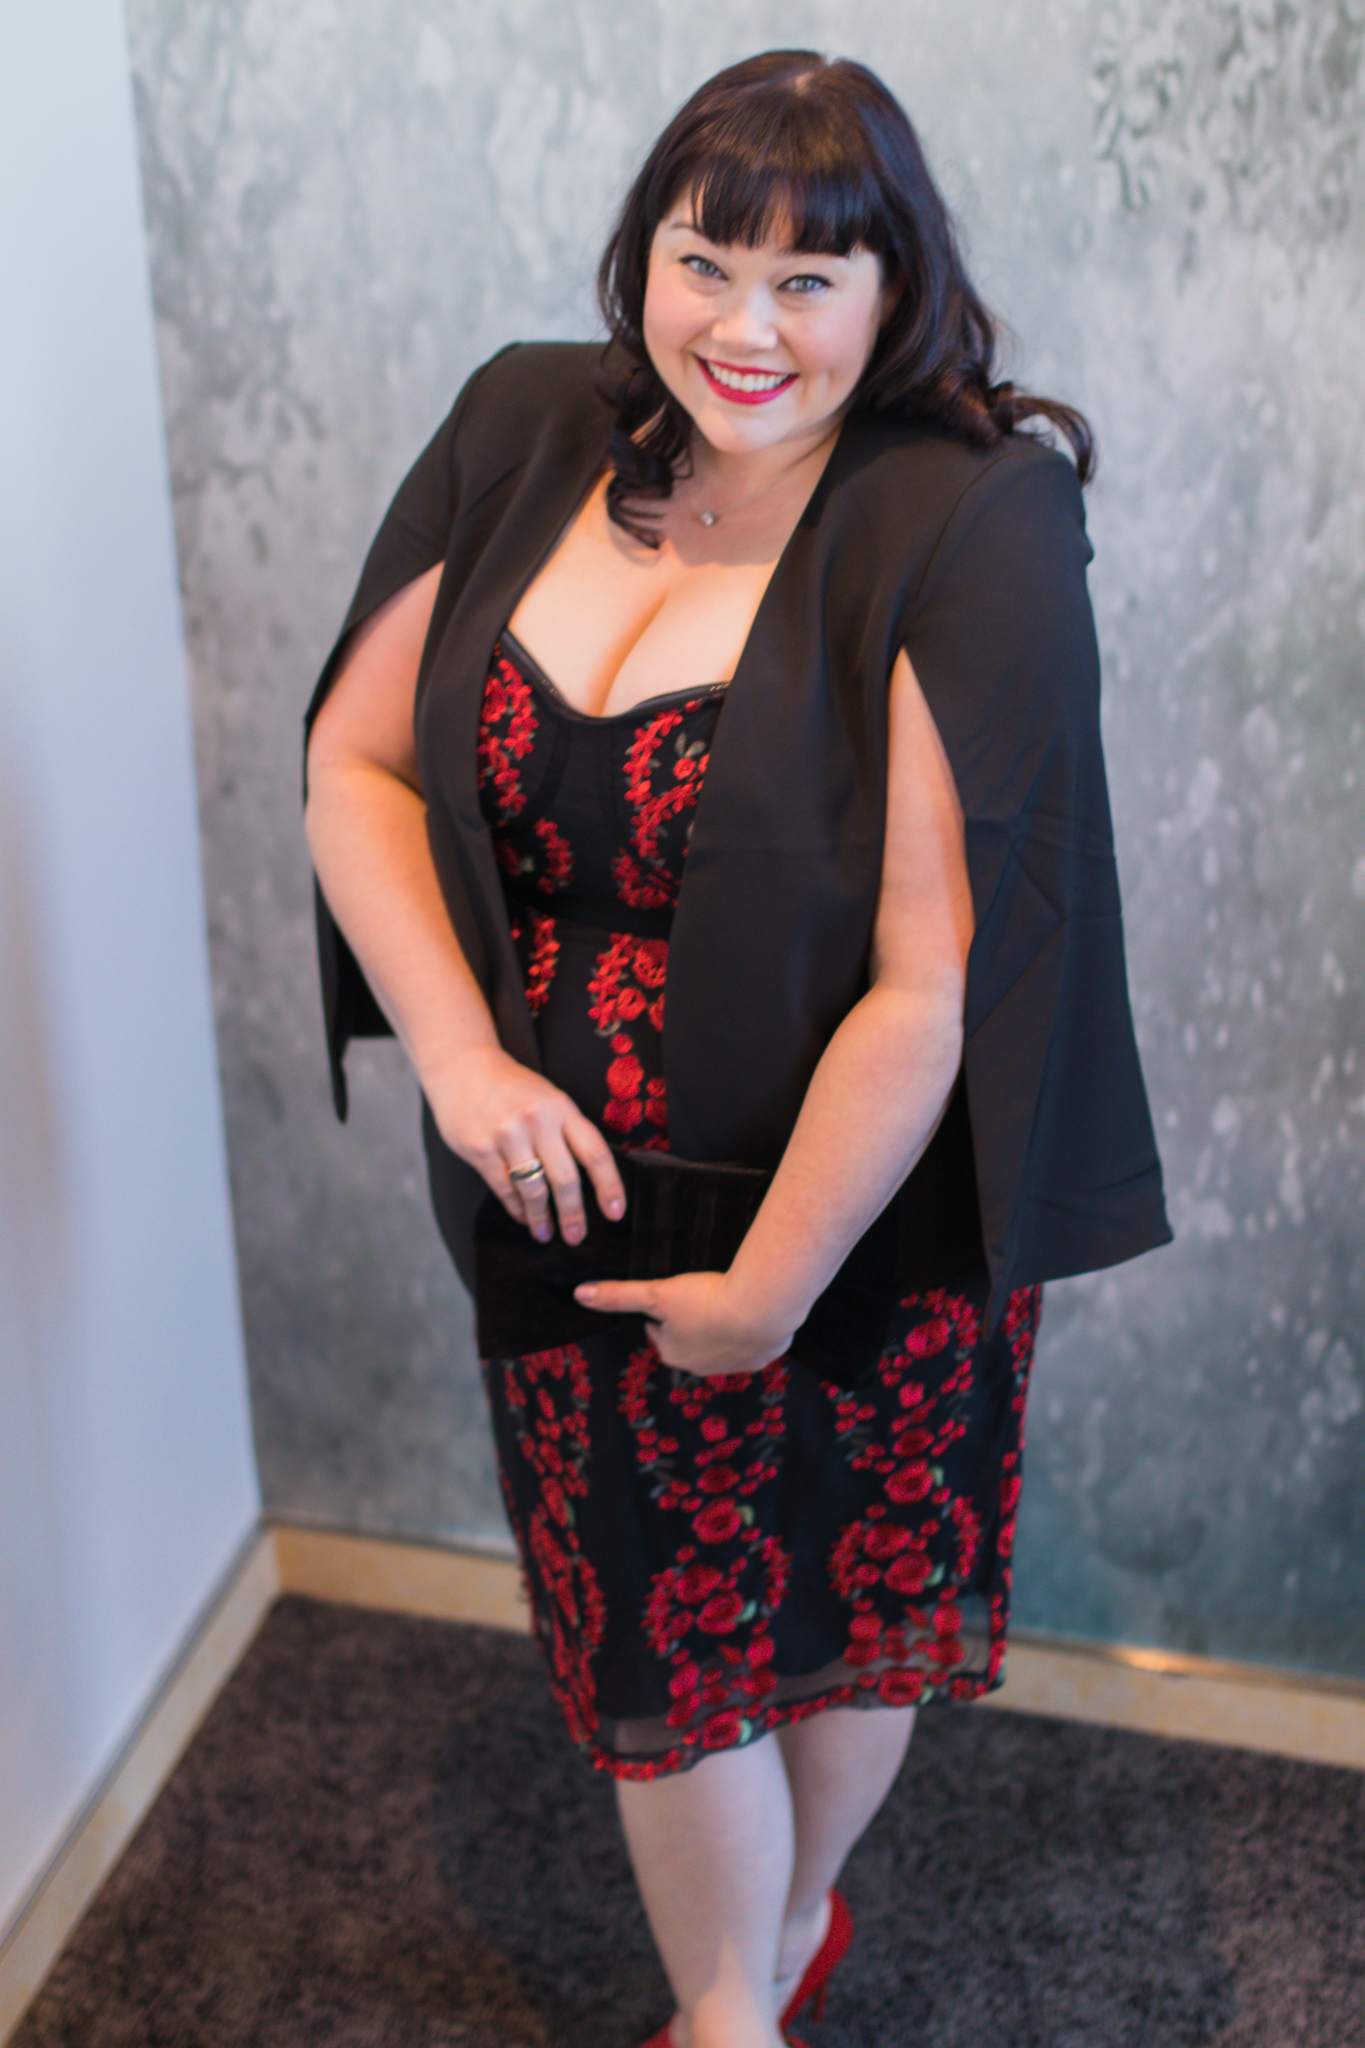 Plus Size Valentine's Day Look, City Chic Jacket Cape, City Chic Red Rose Corset Dress, Chicago Plus Size Blogger